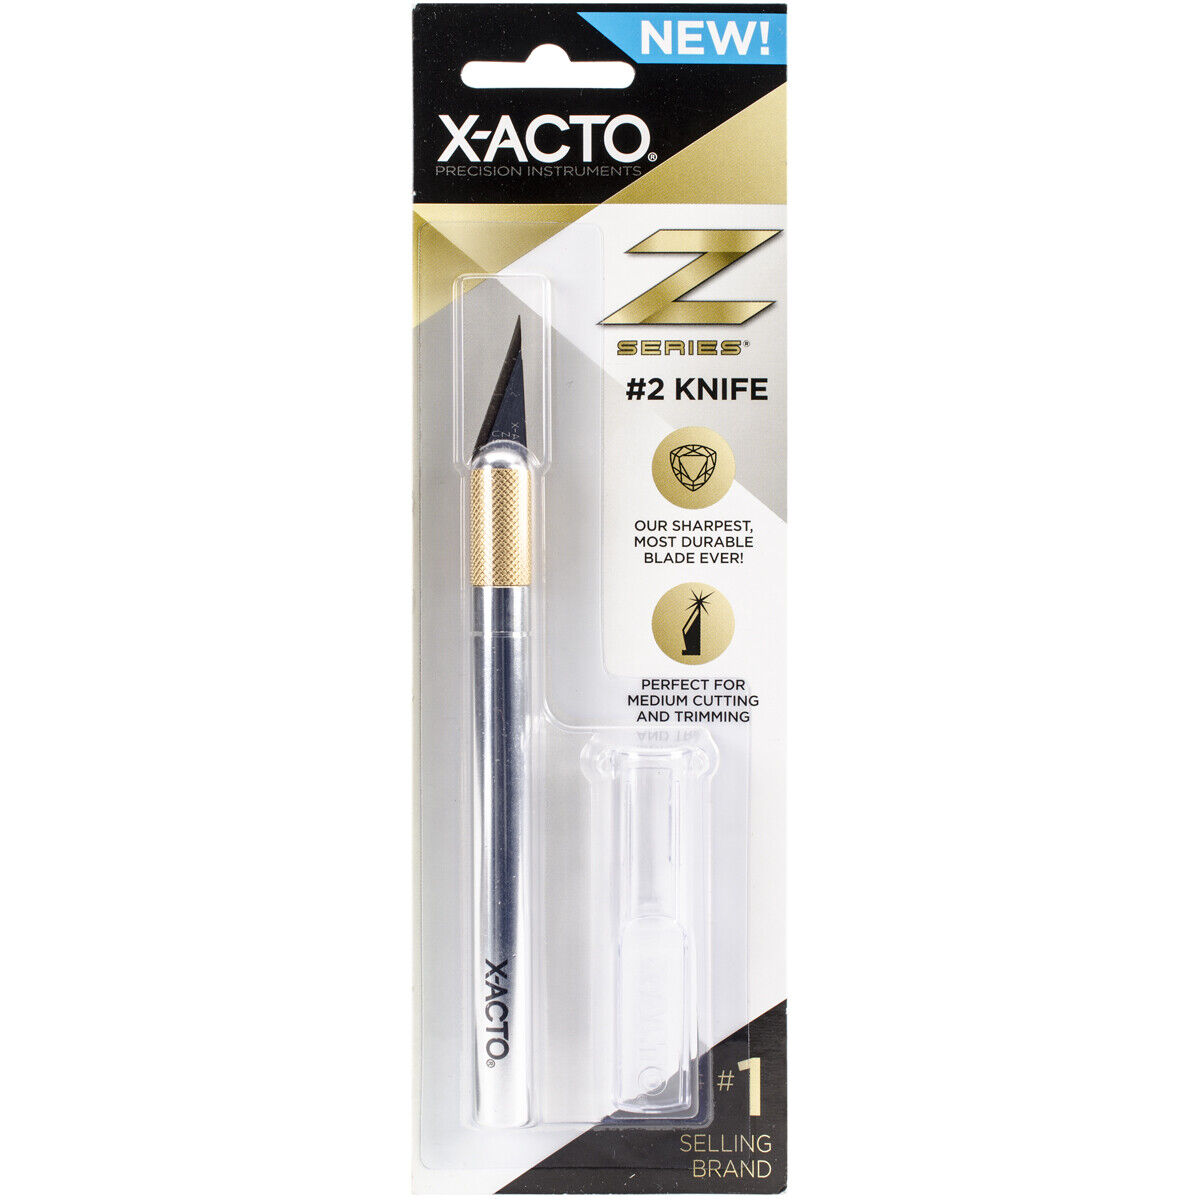 X-ACTO(R) Z Series #2 Craft Knife- - 3 Pack Elmers/X-Acto XZ3602